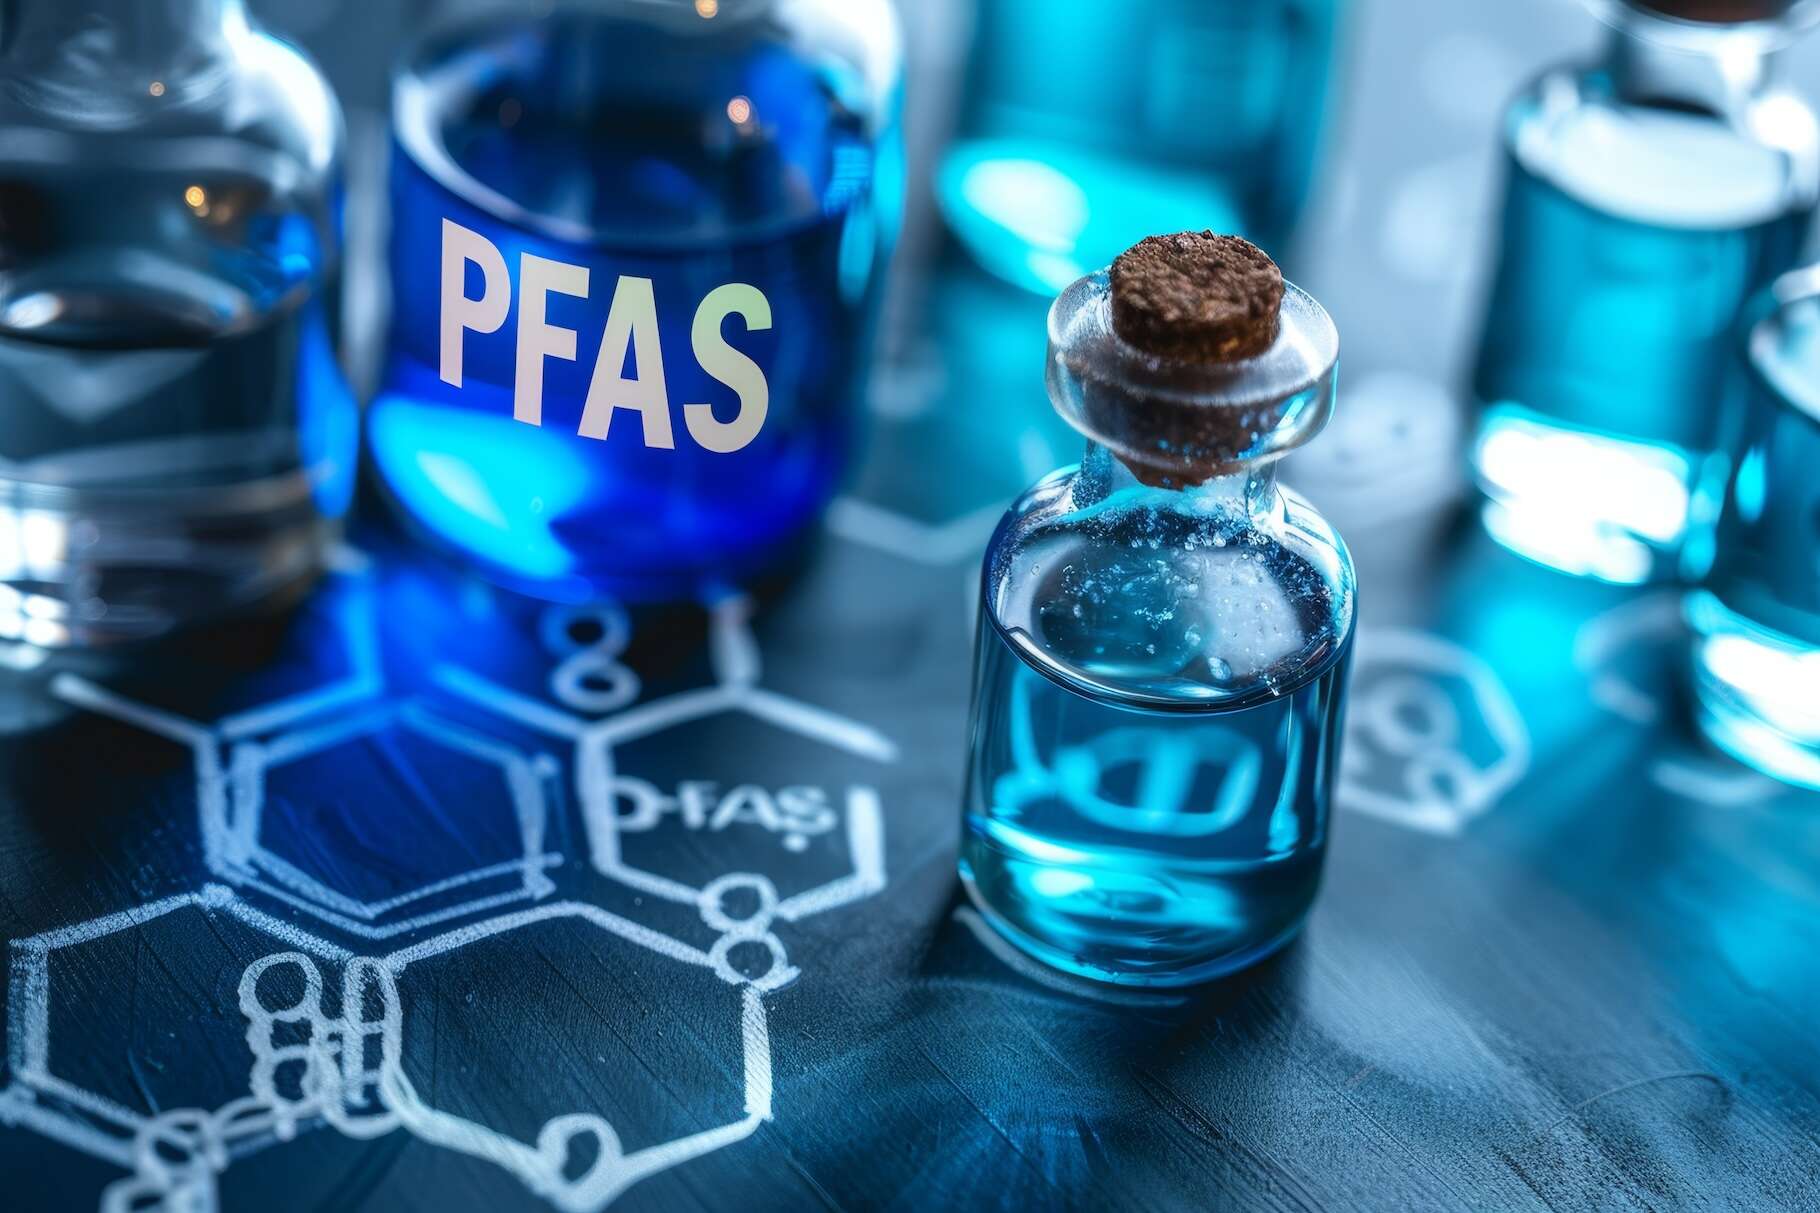 Major discovery of bacteria that destroys PFAS, the dreaded forever chemical pollutants